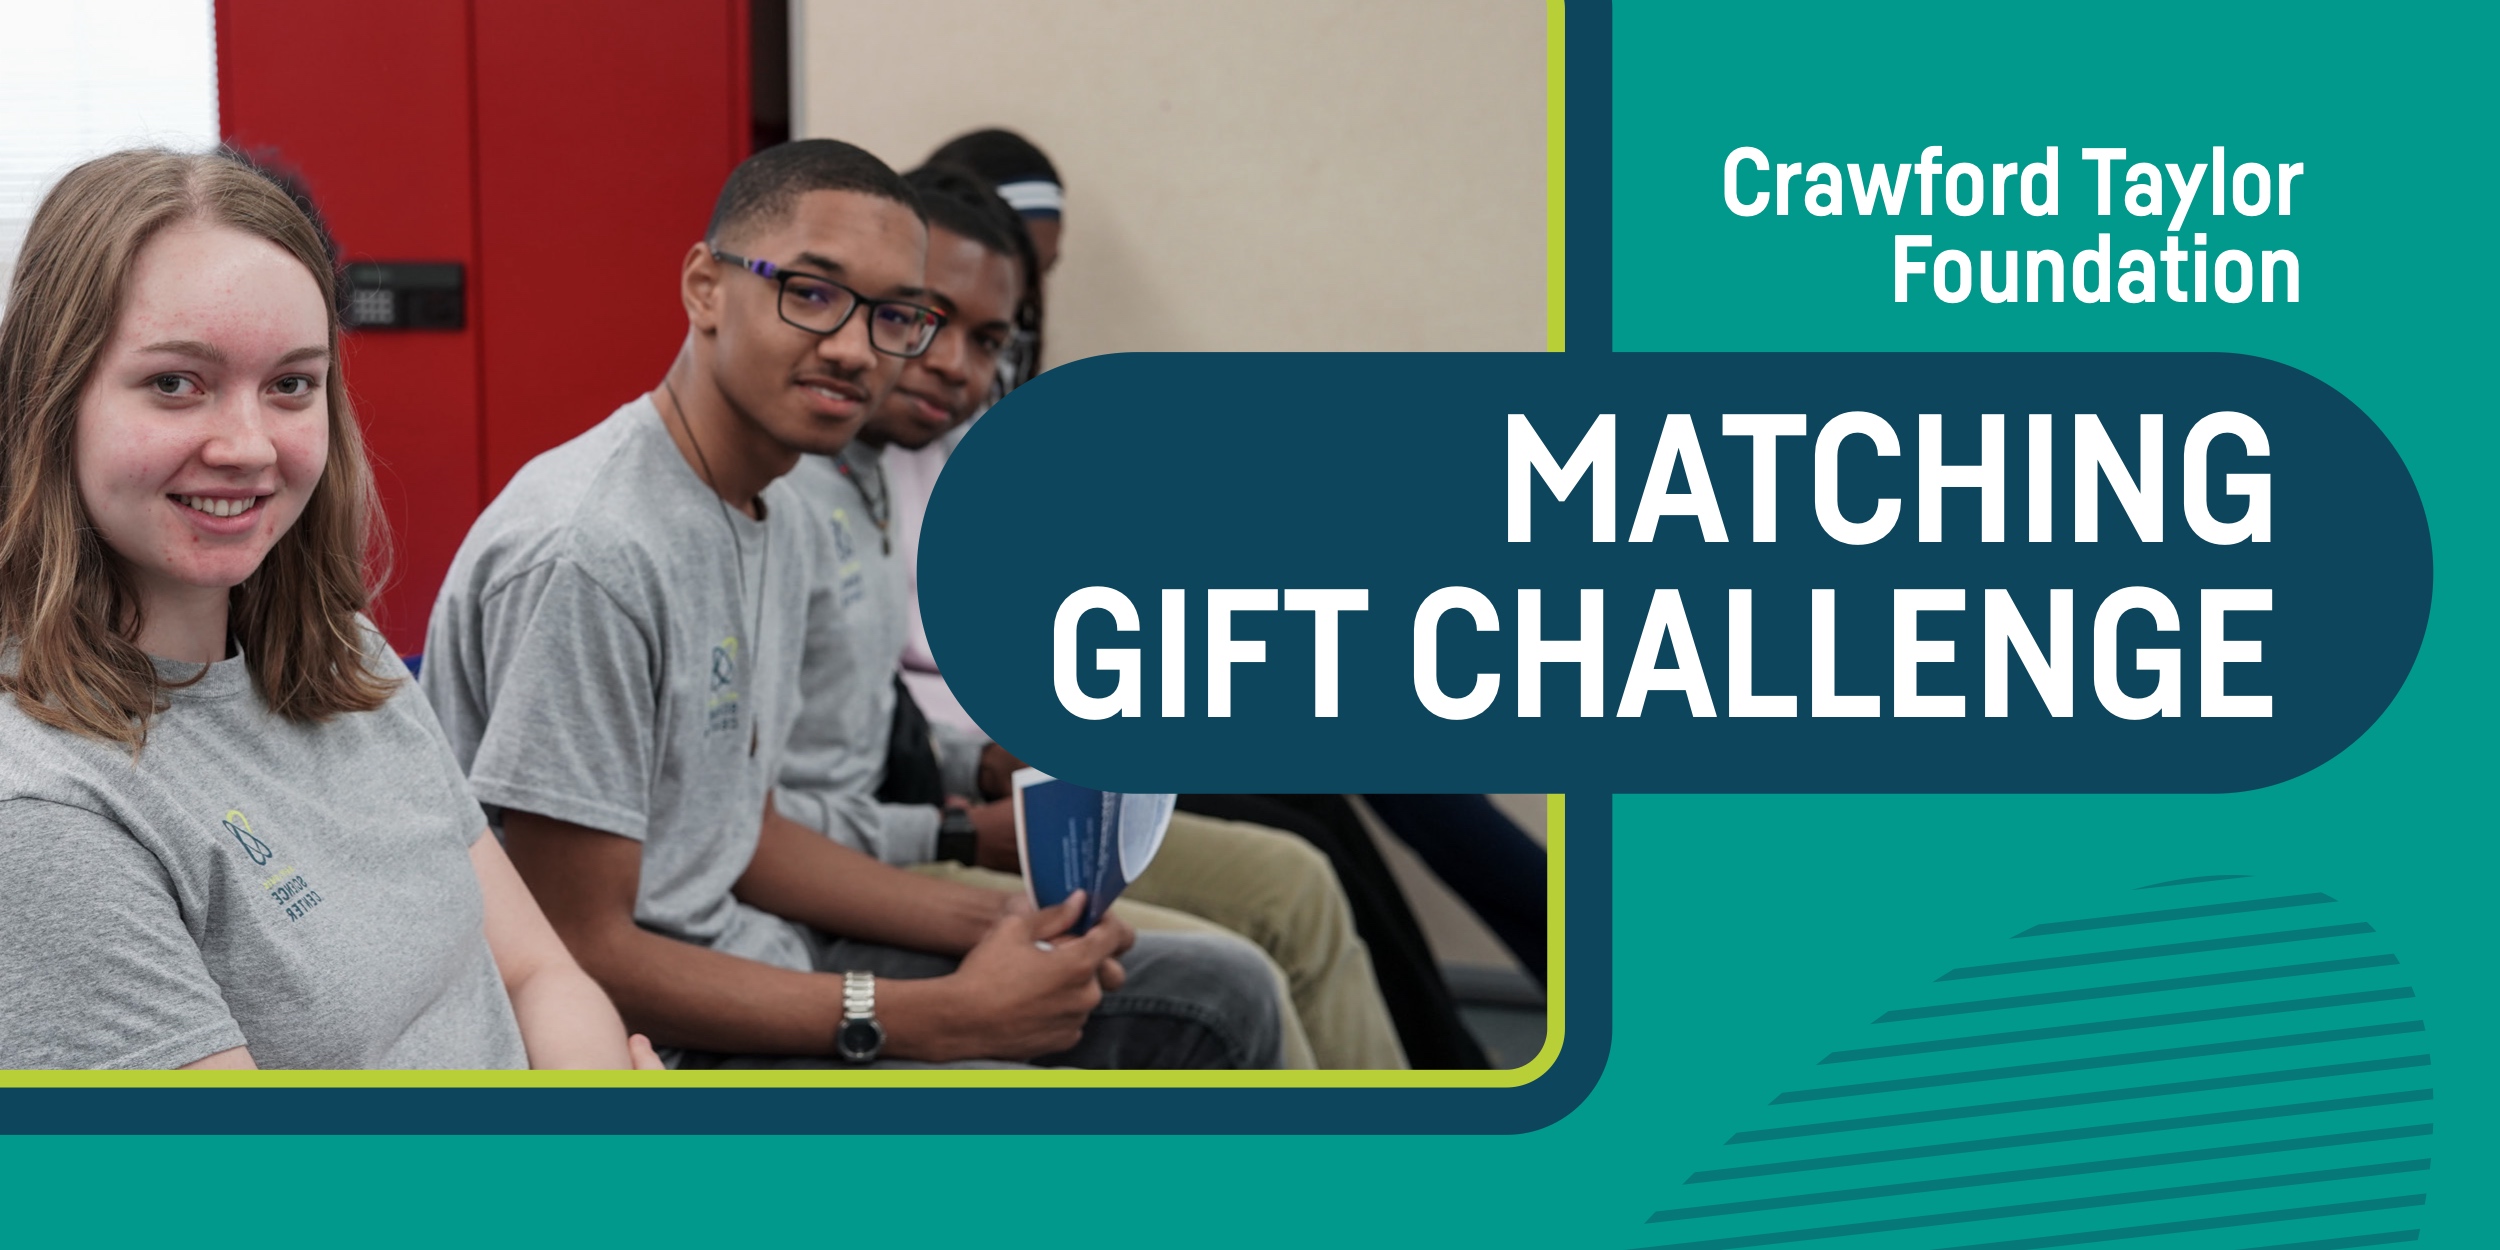 Crawford Taylor Foundation: Matching Gift Challenge